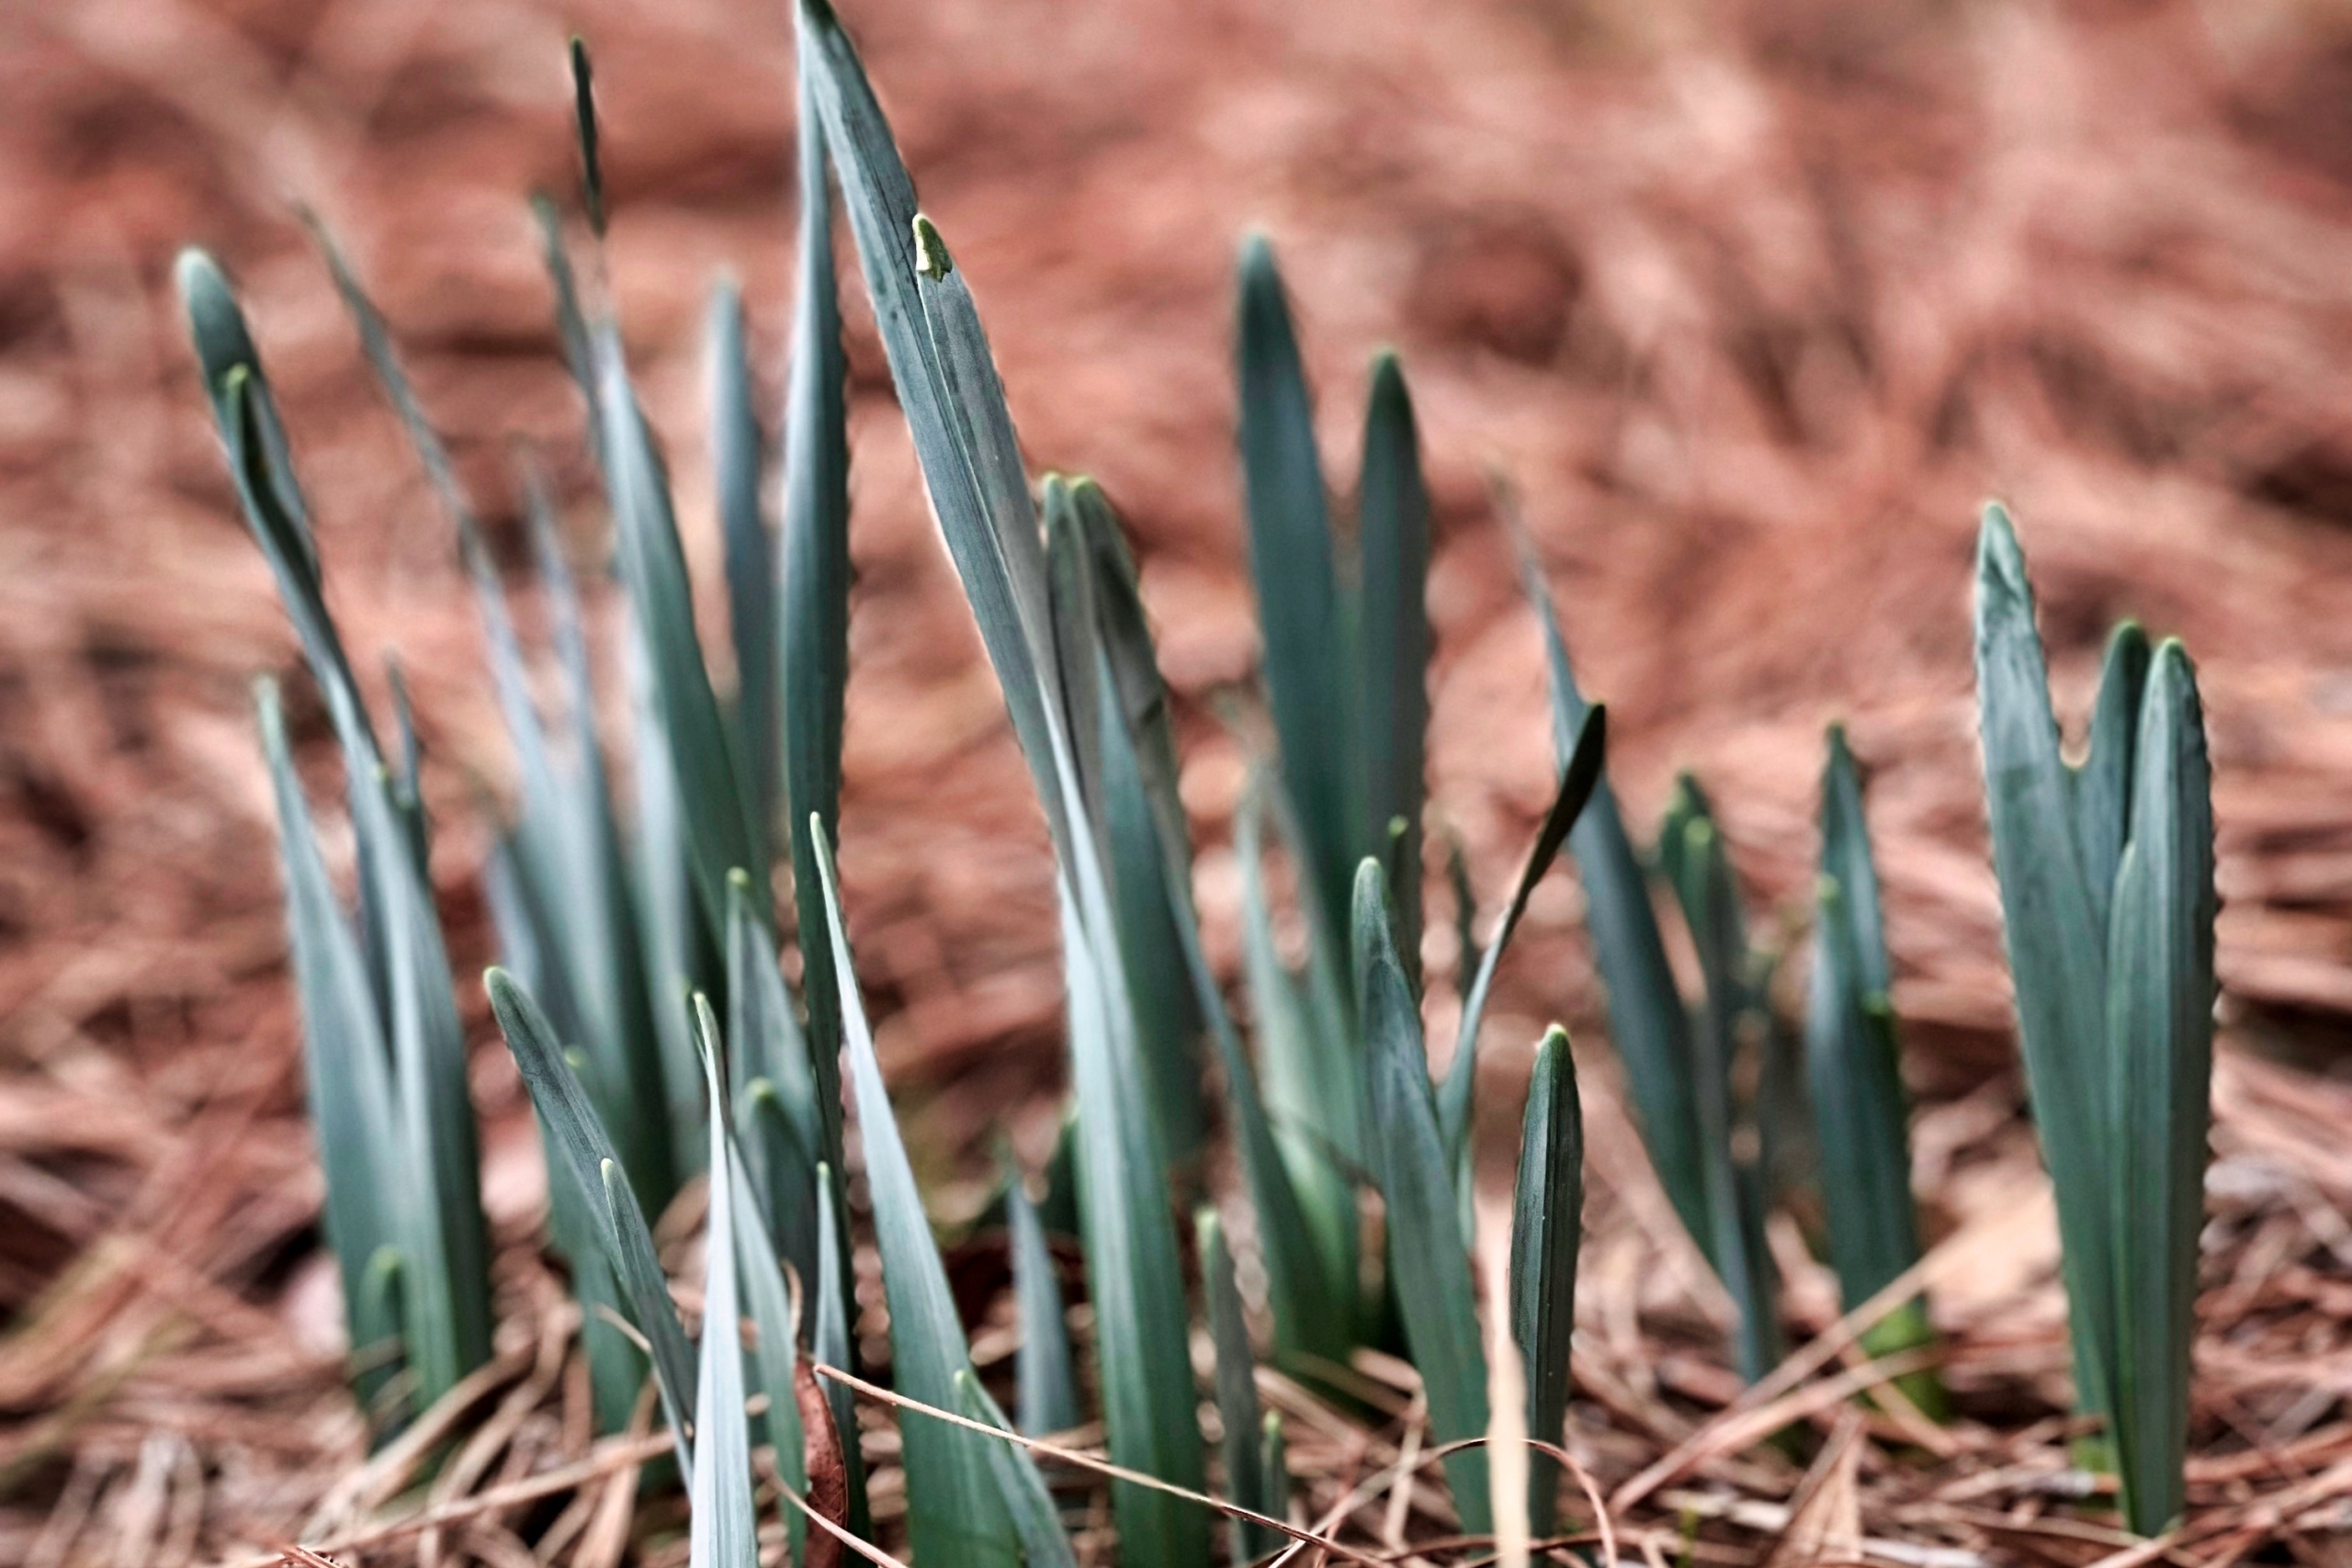 Daffodil leaves starting to sprout from the ground covered with pine needles